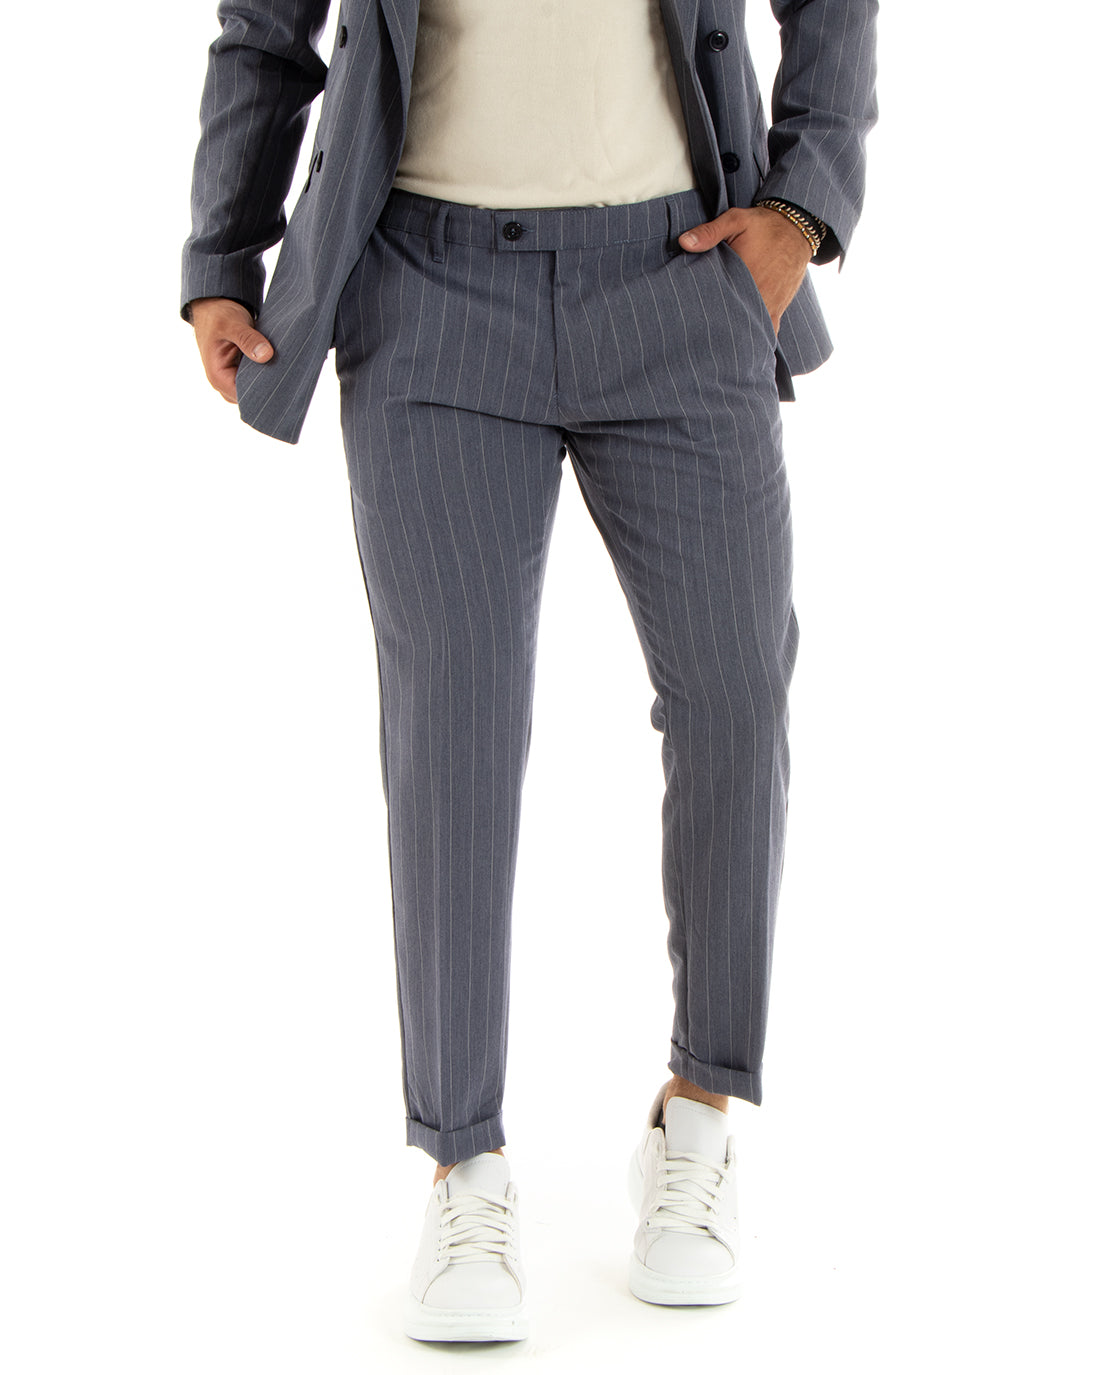 Double-Breasted Men's Suit Viscose Suit Suit Jacket Trousers Gray Striped Pinstripe Elegant Ceremony GIOSAL-OU2381A